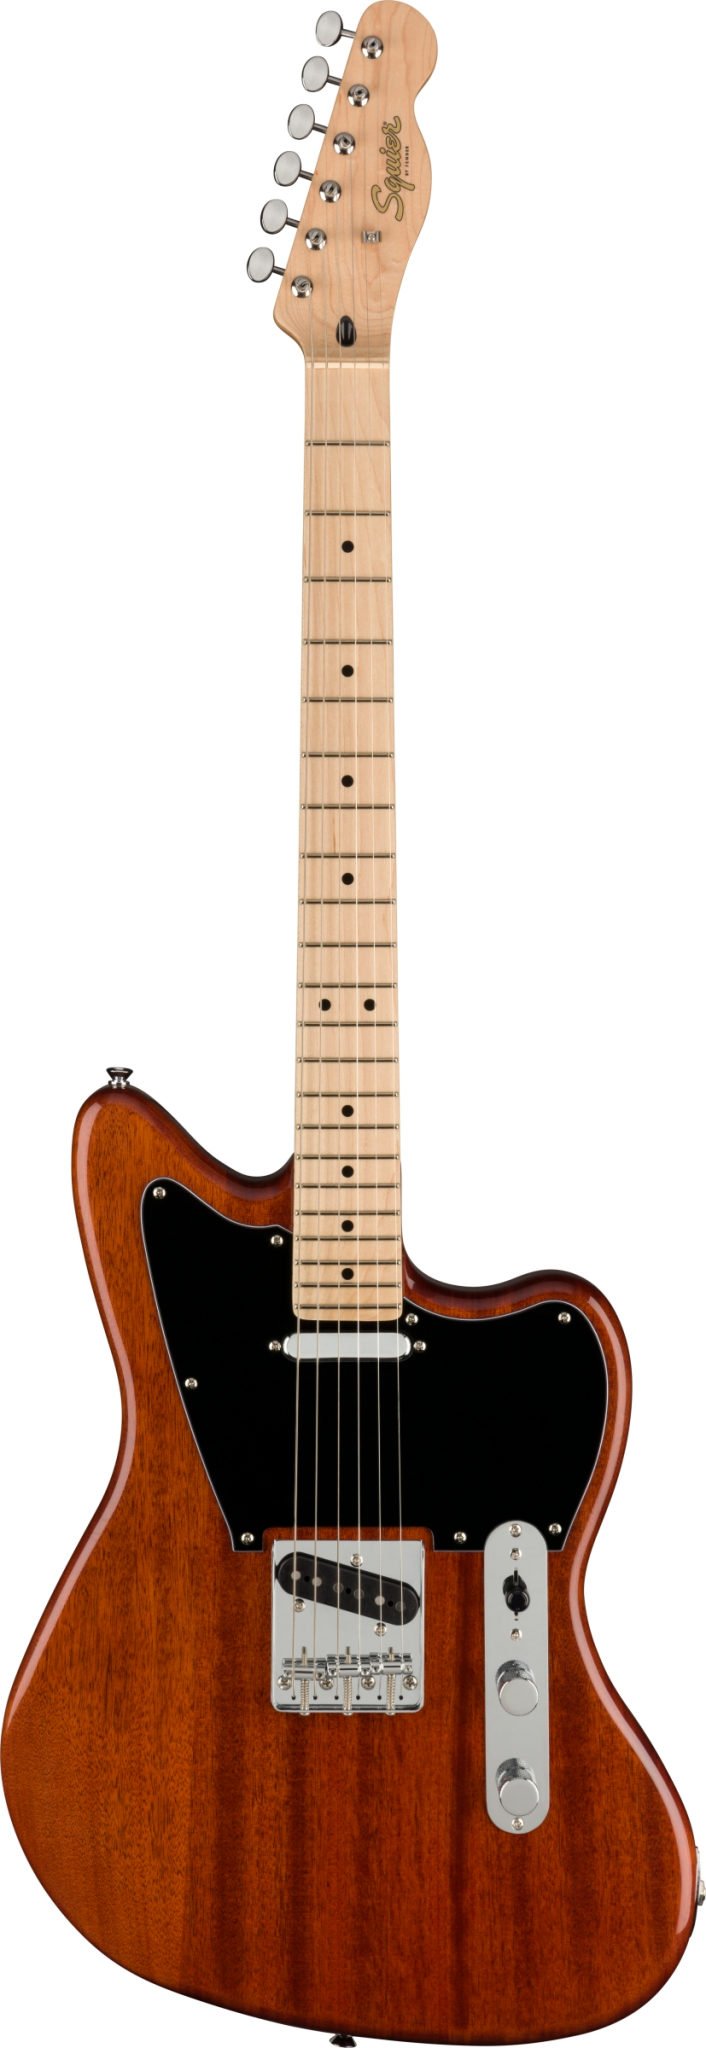 FENDER SQUIER PARANORMAL OFFSET TELECASTER BY FENDER – NATURAL